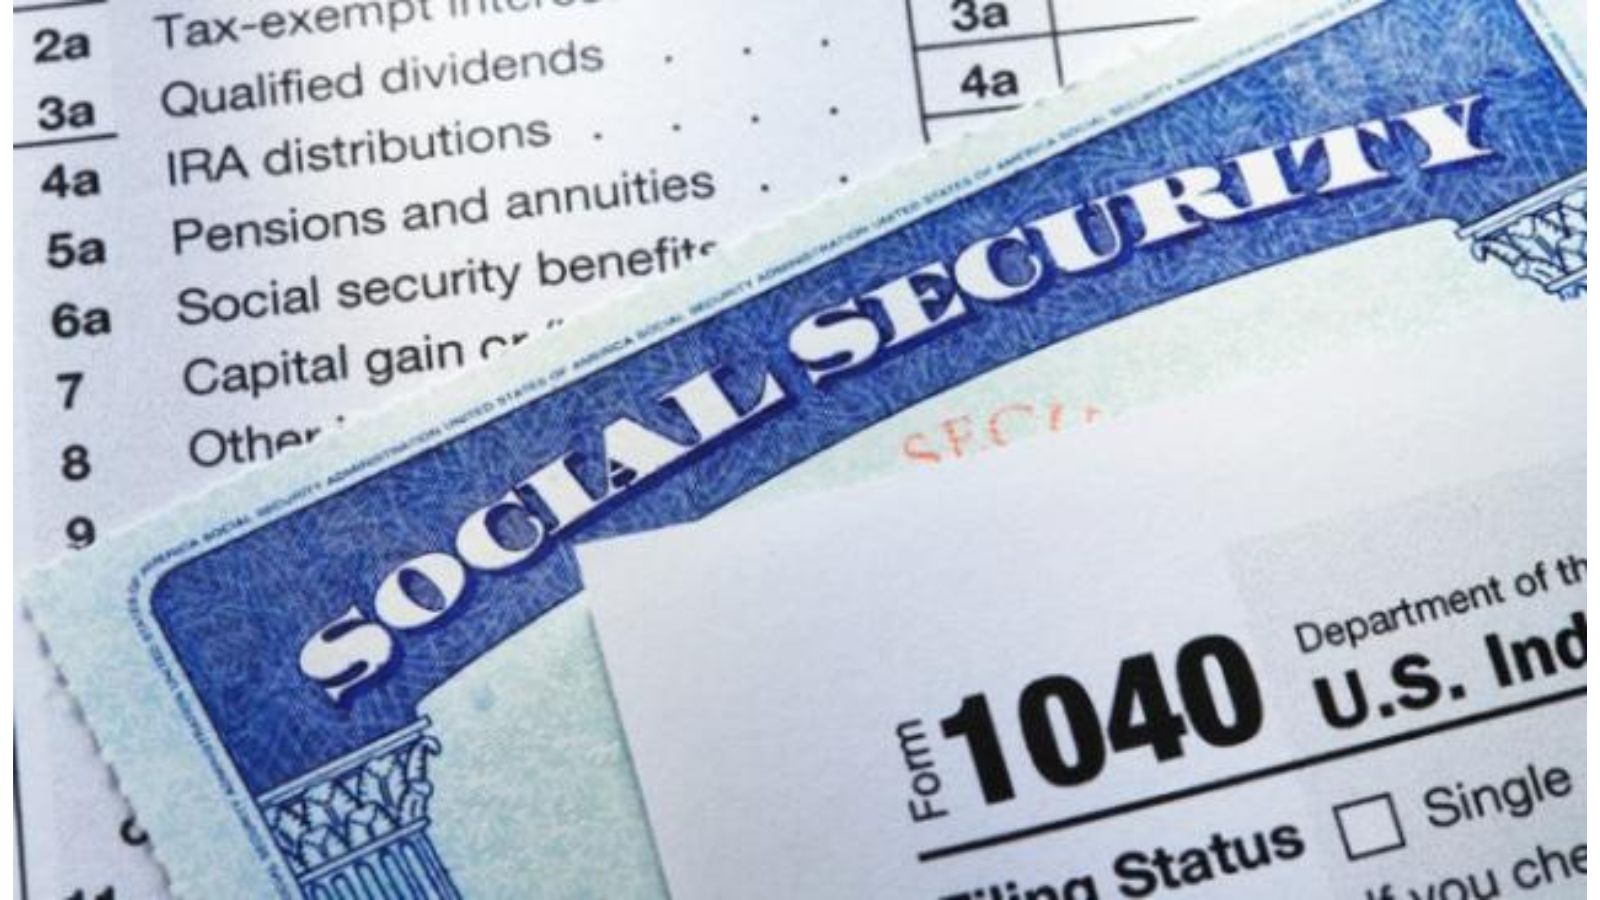 $1000 Rental Assistance for Social Security